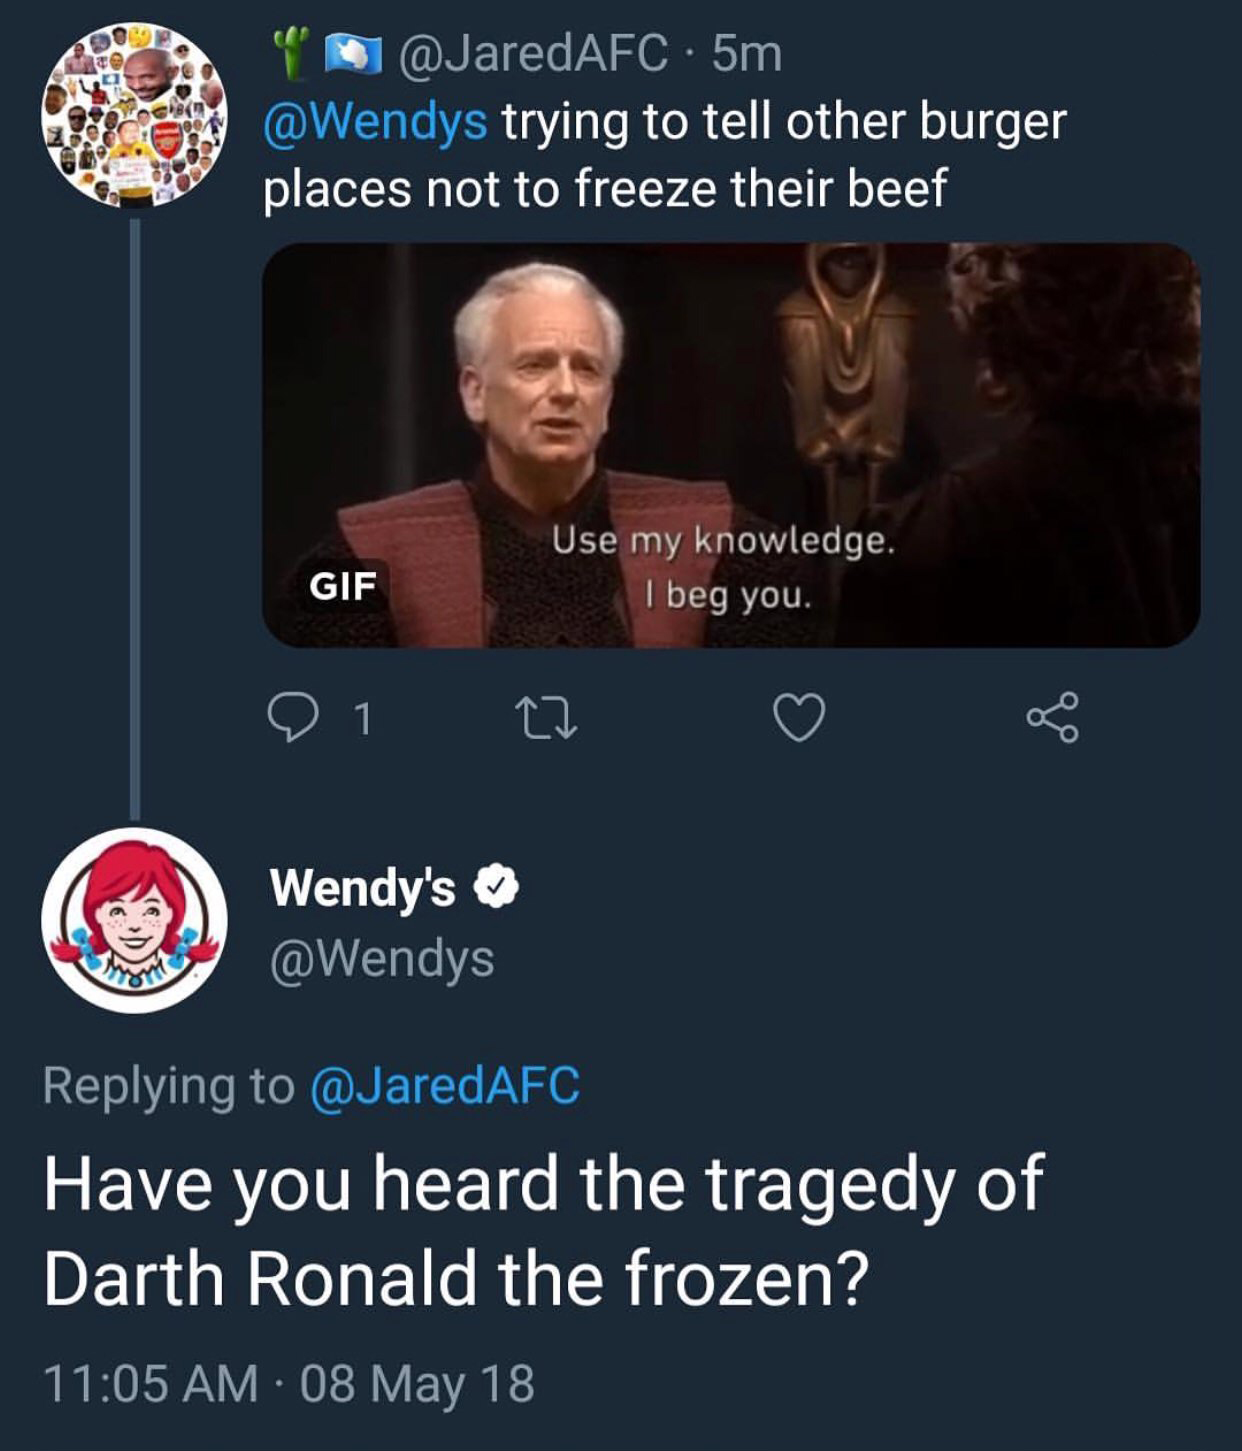 memes - arin and wendy's - 5m trying to tell other burger places not to freeze their beef Gif Use my knowledge. I beg you. 101 27 0 8 Wendy's Have you heard the tragedy of Darth Ronald the frozen? 08 May 18